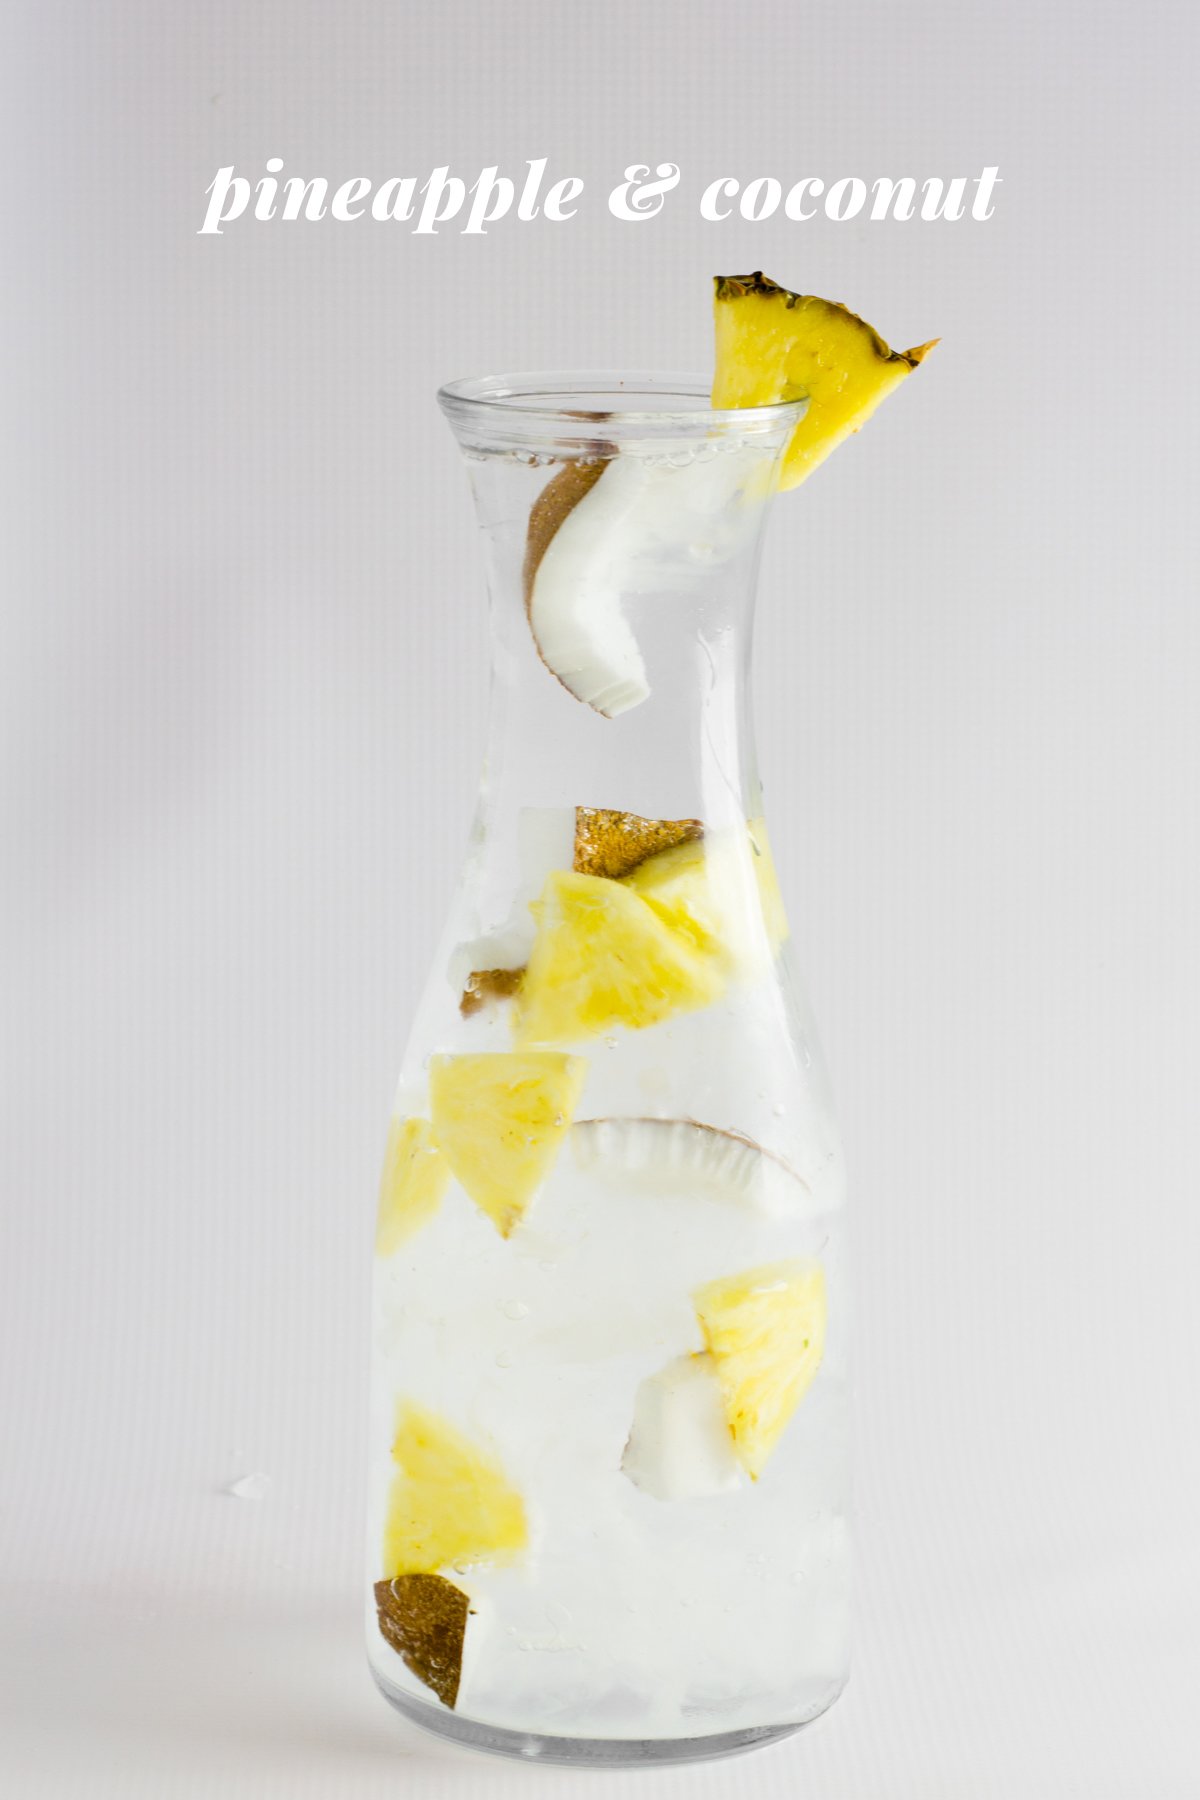 Pineapple and coconut infused water is displayed in a glass carafe. A text overlay reads, "Pineapple & Coconut."